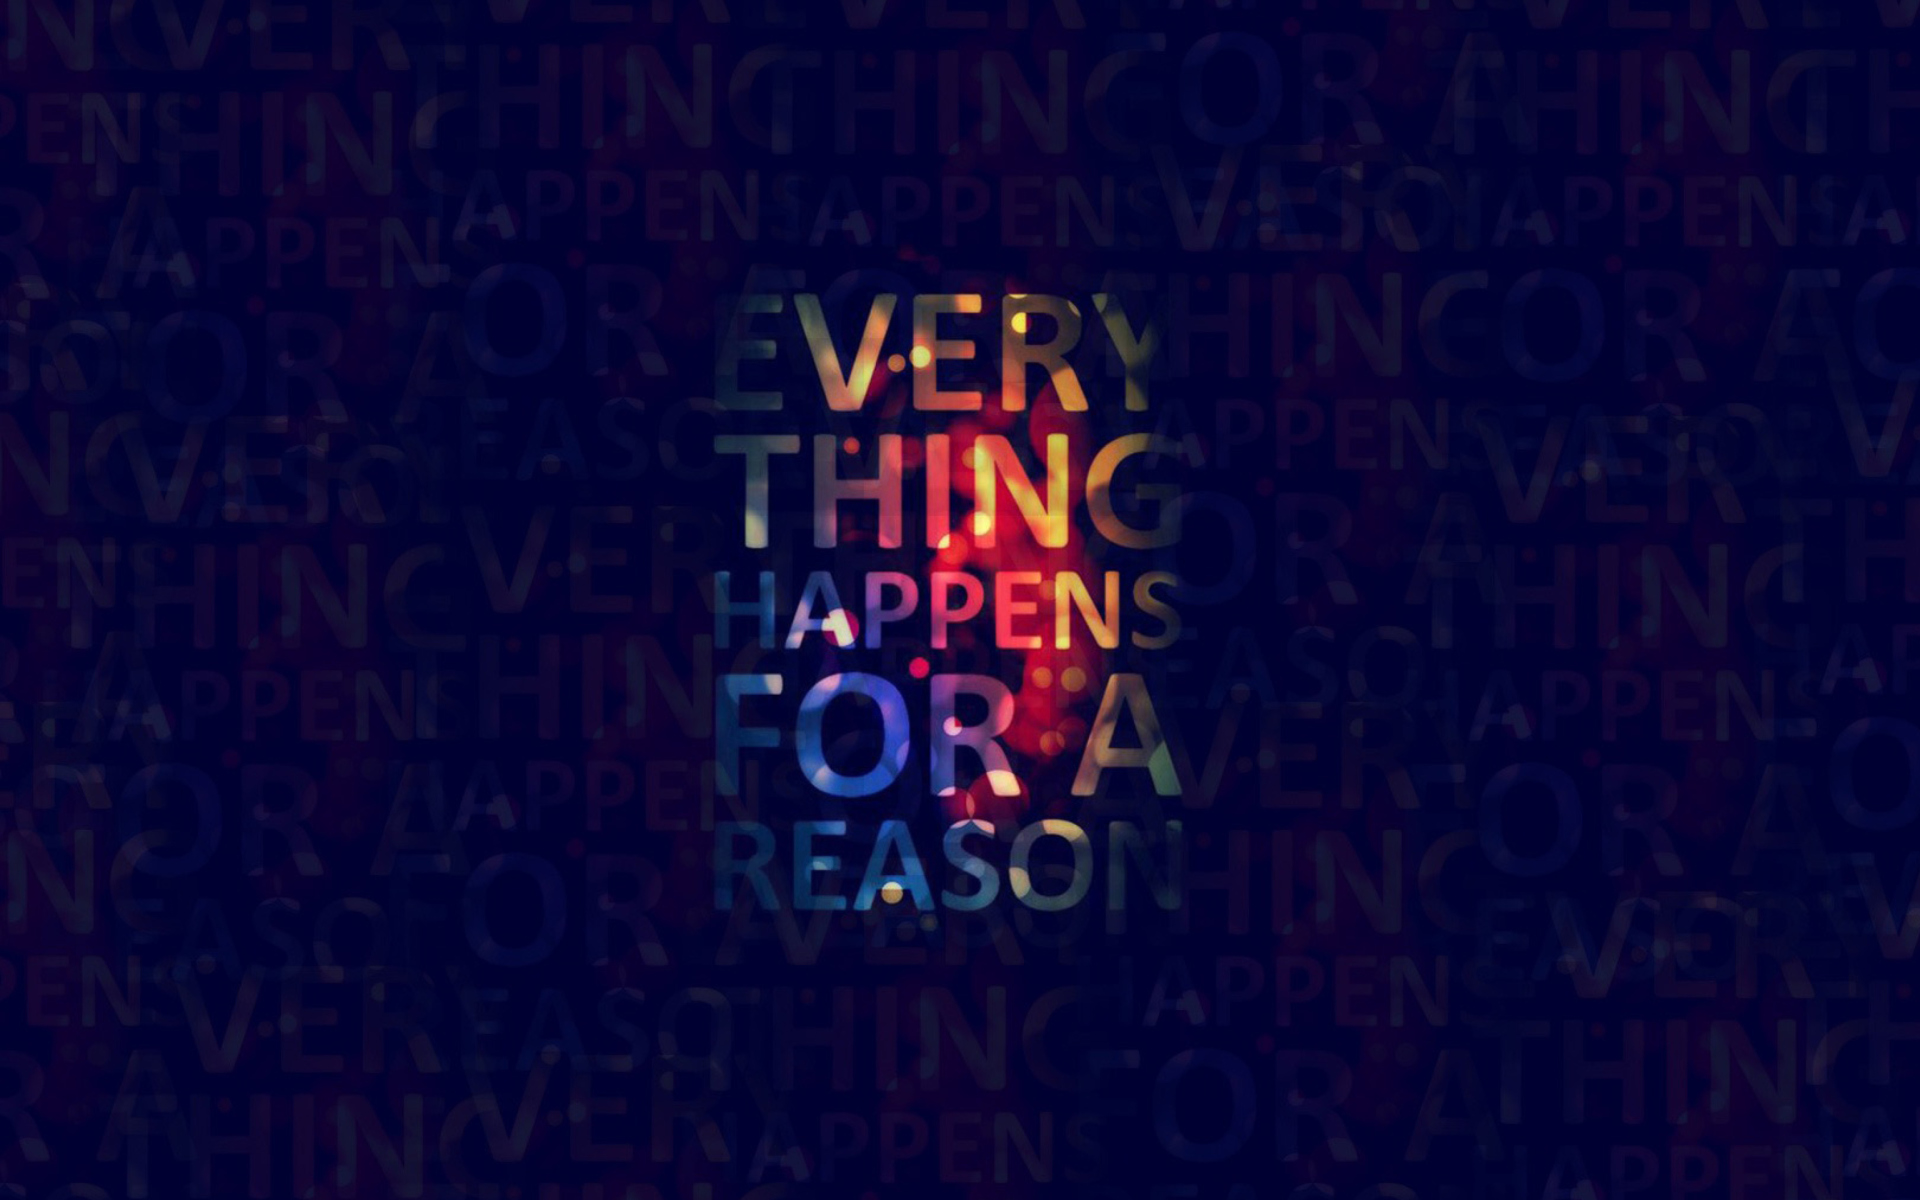 Everything Happens For A Reason wallpaper 1920x1200